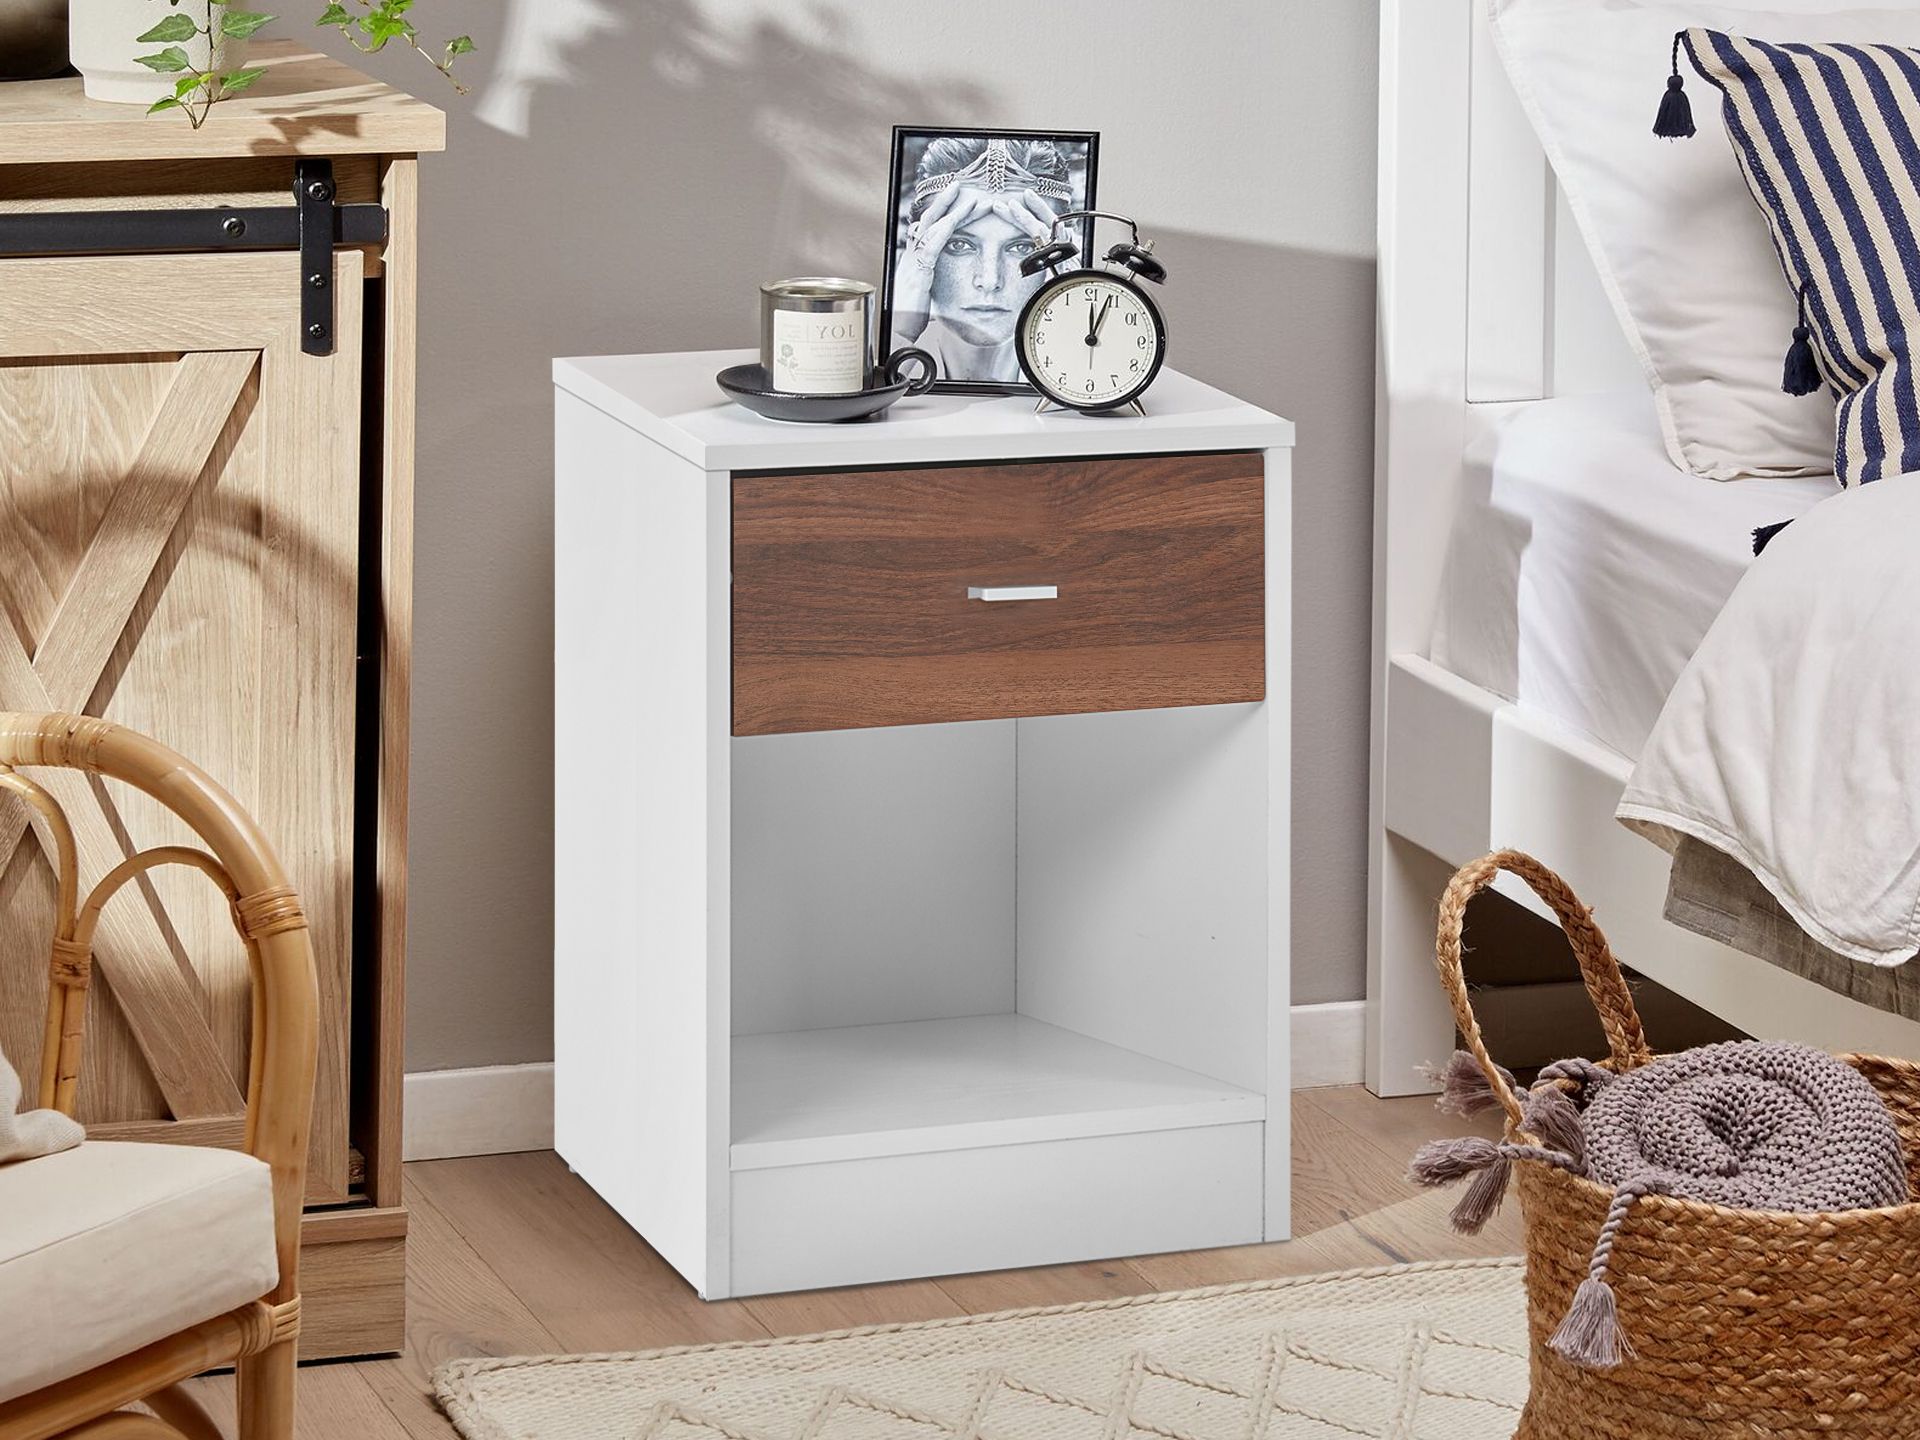 Quilo Wooden Bedside Table - Walnut